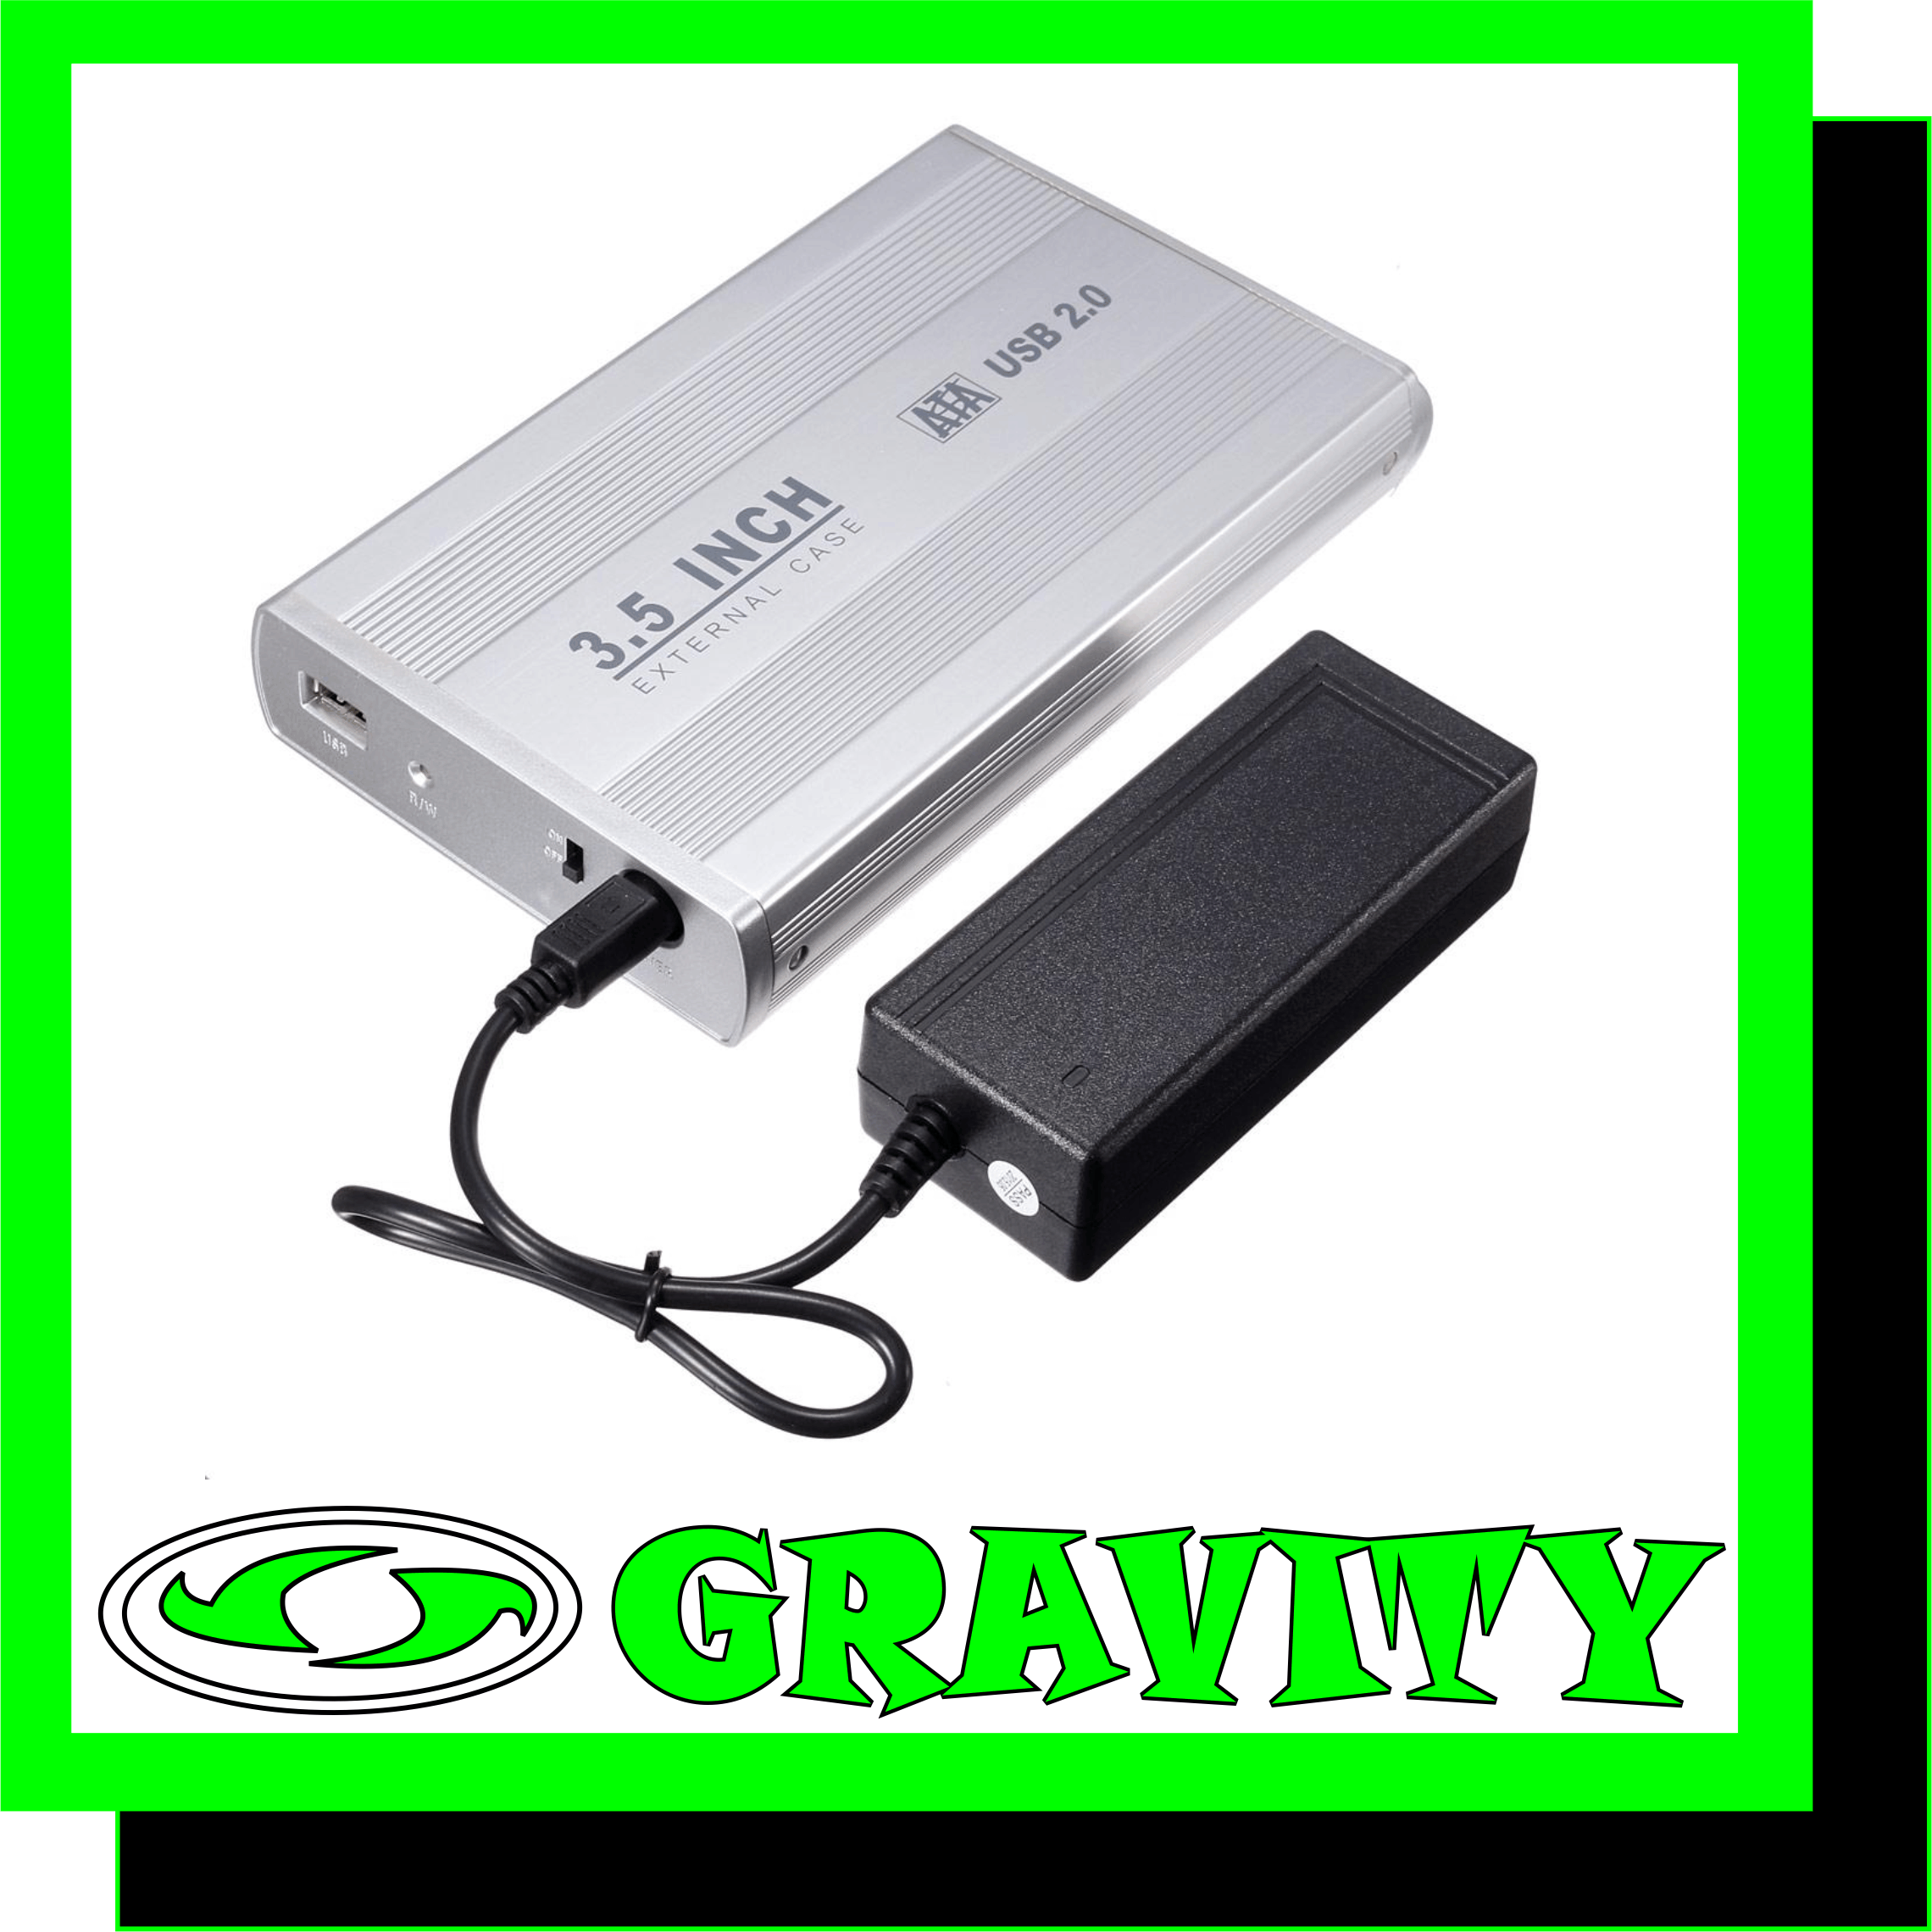 Extend your data storage ability with this hard drive enclosure. Fits SATA drives of 3.5" only. Transfer data and files to your PC at 480 Mbps over USB cable. All necessary cables are included. An indicator light shows read/write activity and the case features an on/off switch.